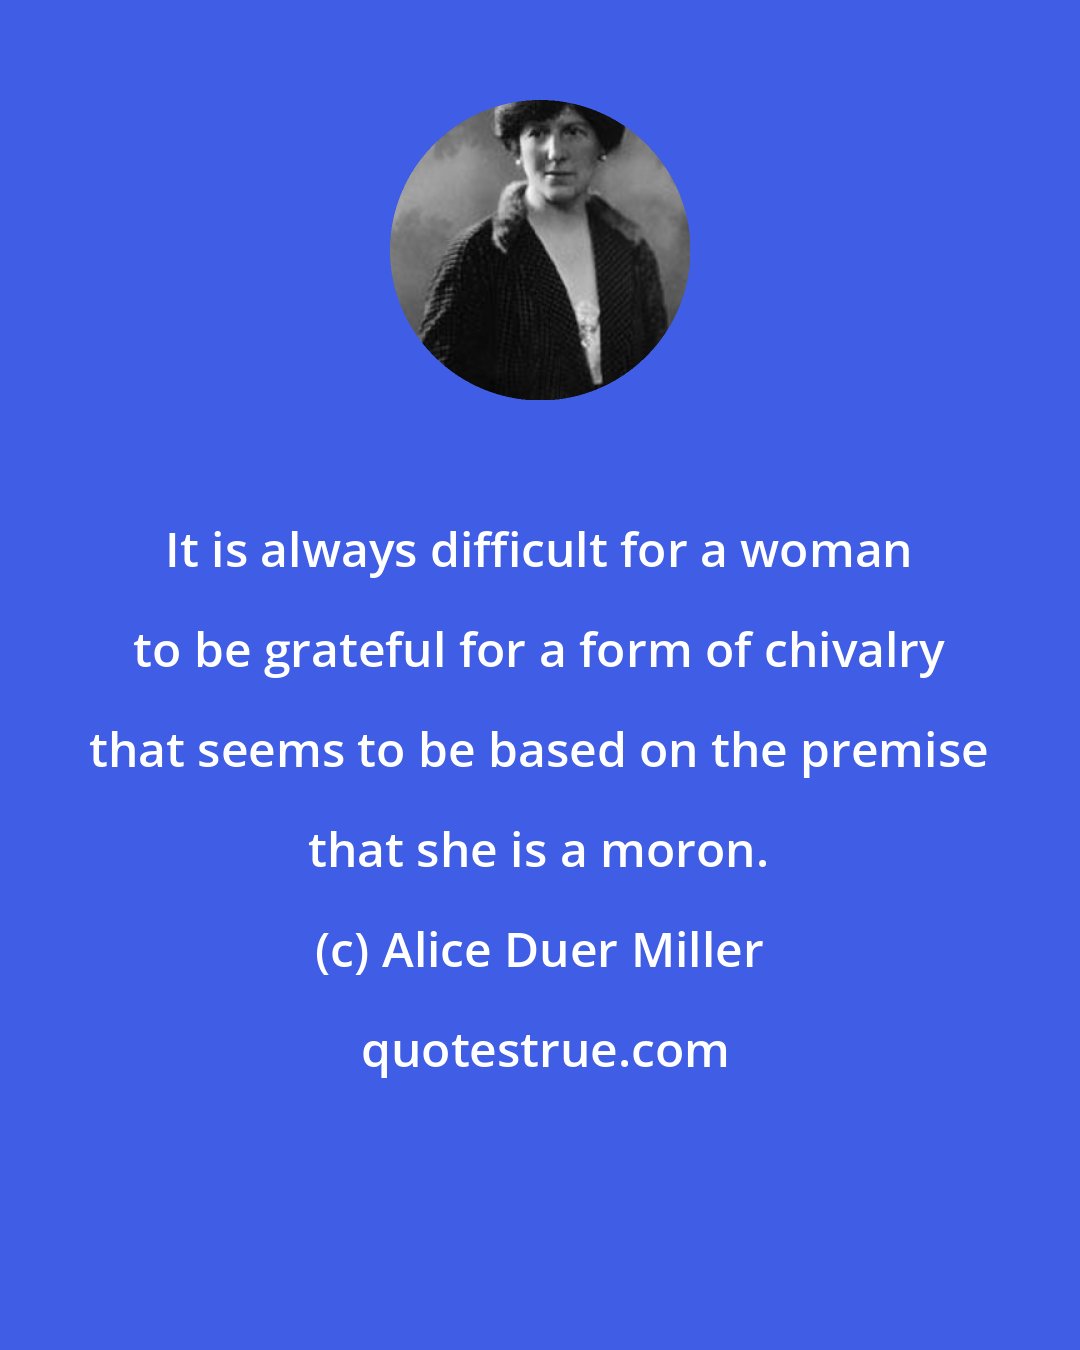 Alice Duer Miller: It is always difficult for a woman to be grateful for a form of chivalry that seems to be based on the premise that she is a moron.